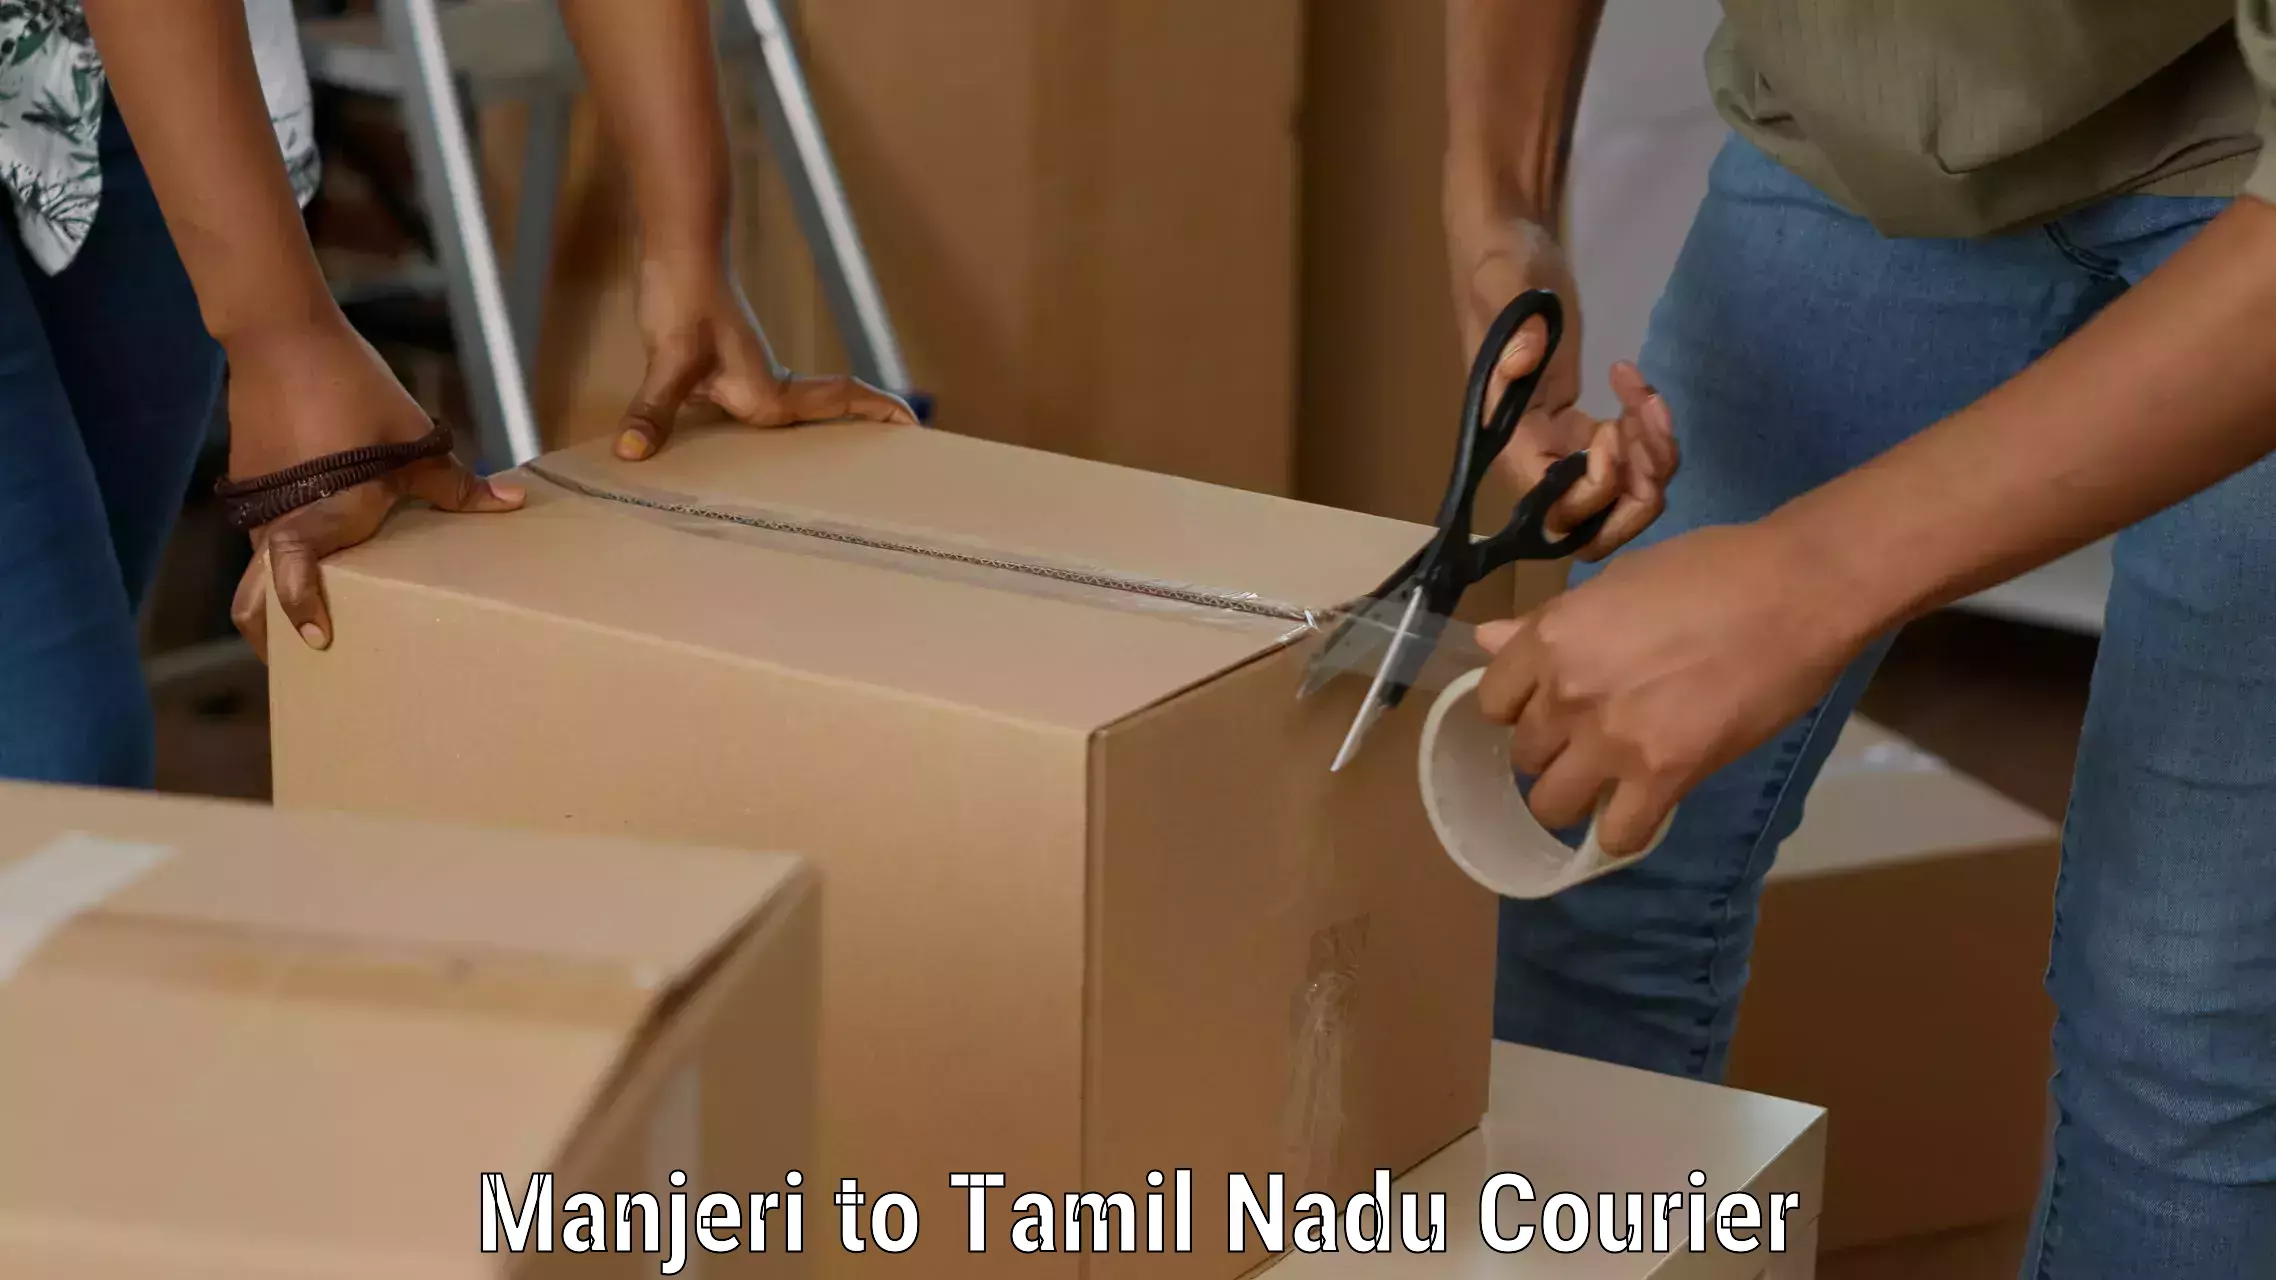 Reliable courier service Manjeri to Tamil Nadu